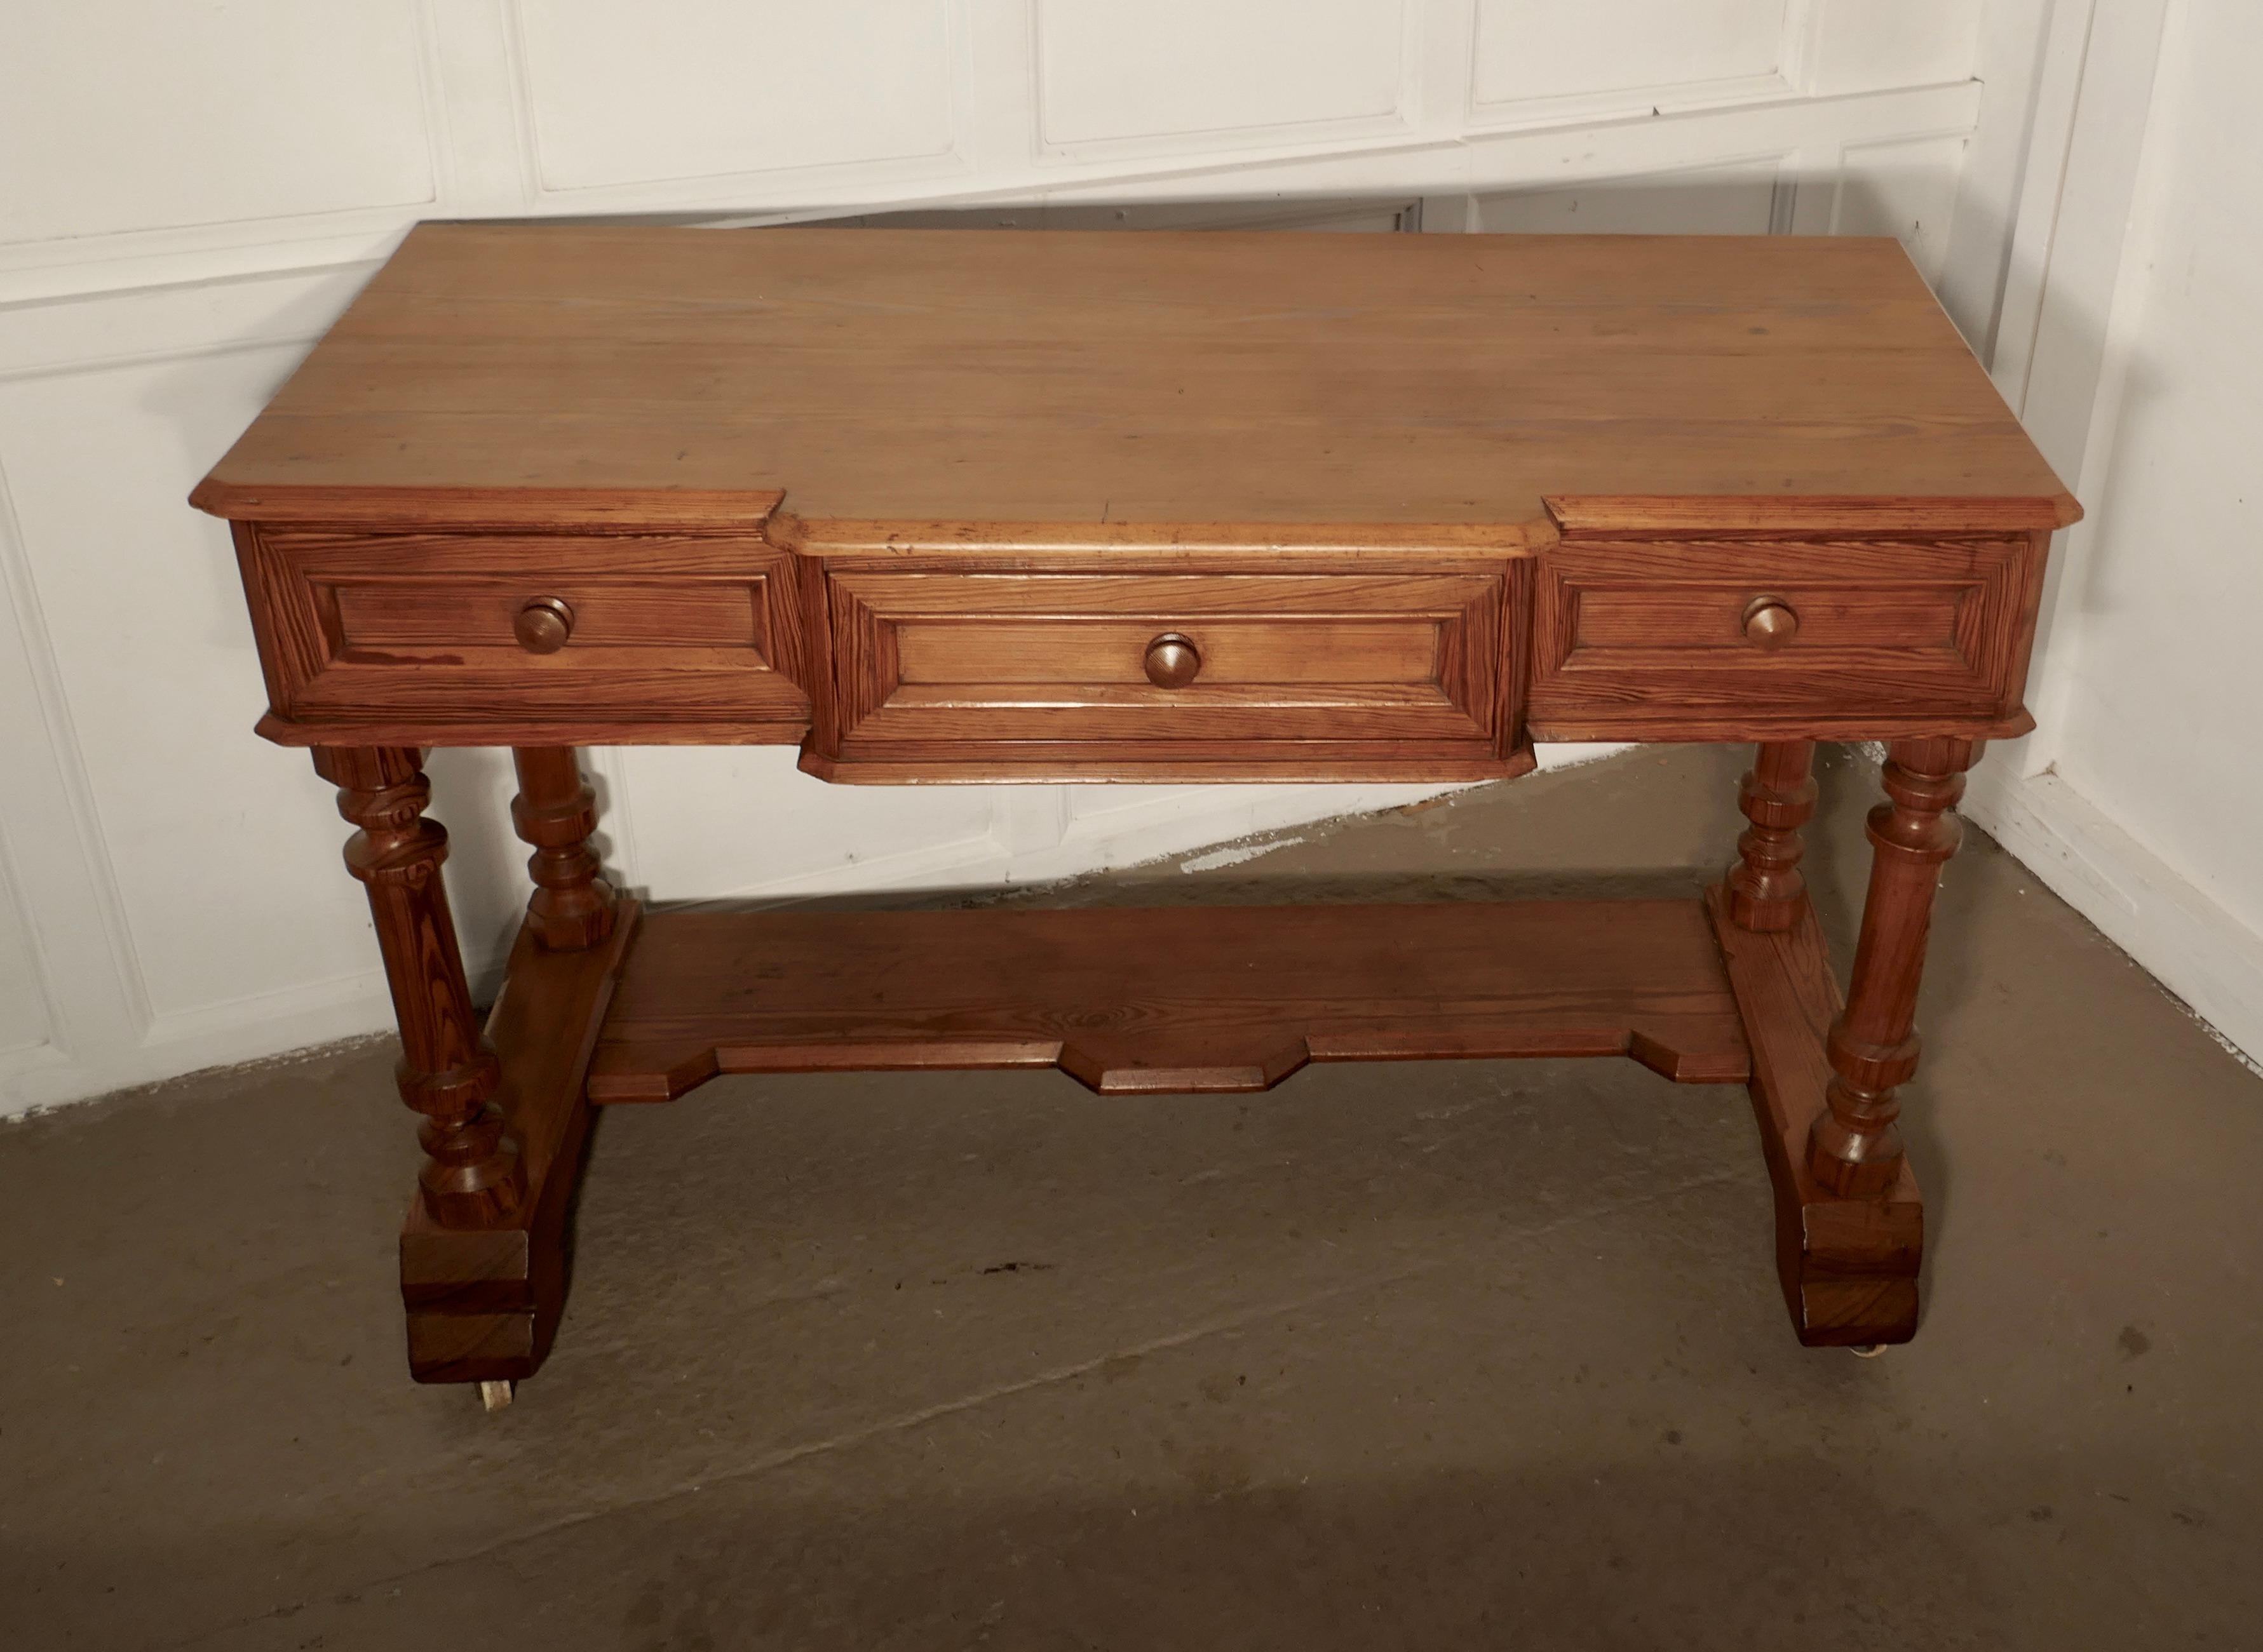 Arts & Crafts pitch pine writing table
 
A good heavy quality pitch pine side table or writing table in the Arts & Crafts style
There are 3 drawers along the break side, they have turned pitch pine knobs
The desk has a shaped edge to the top and